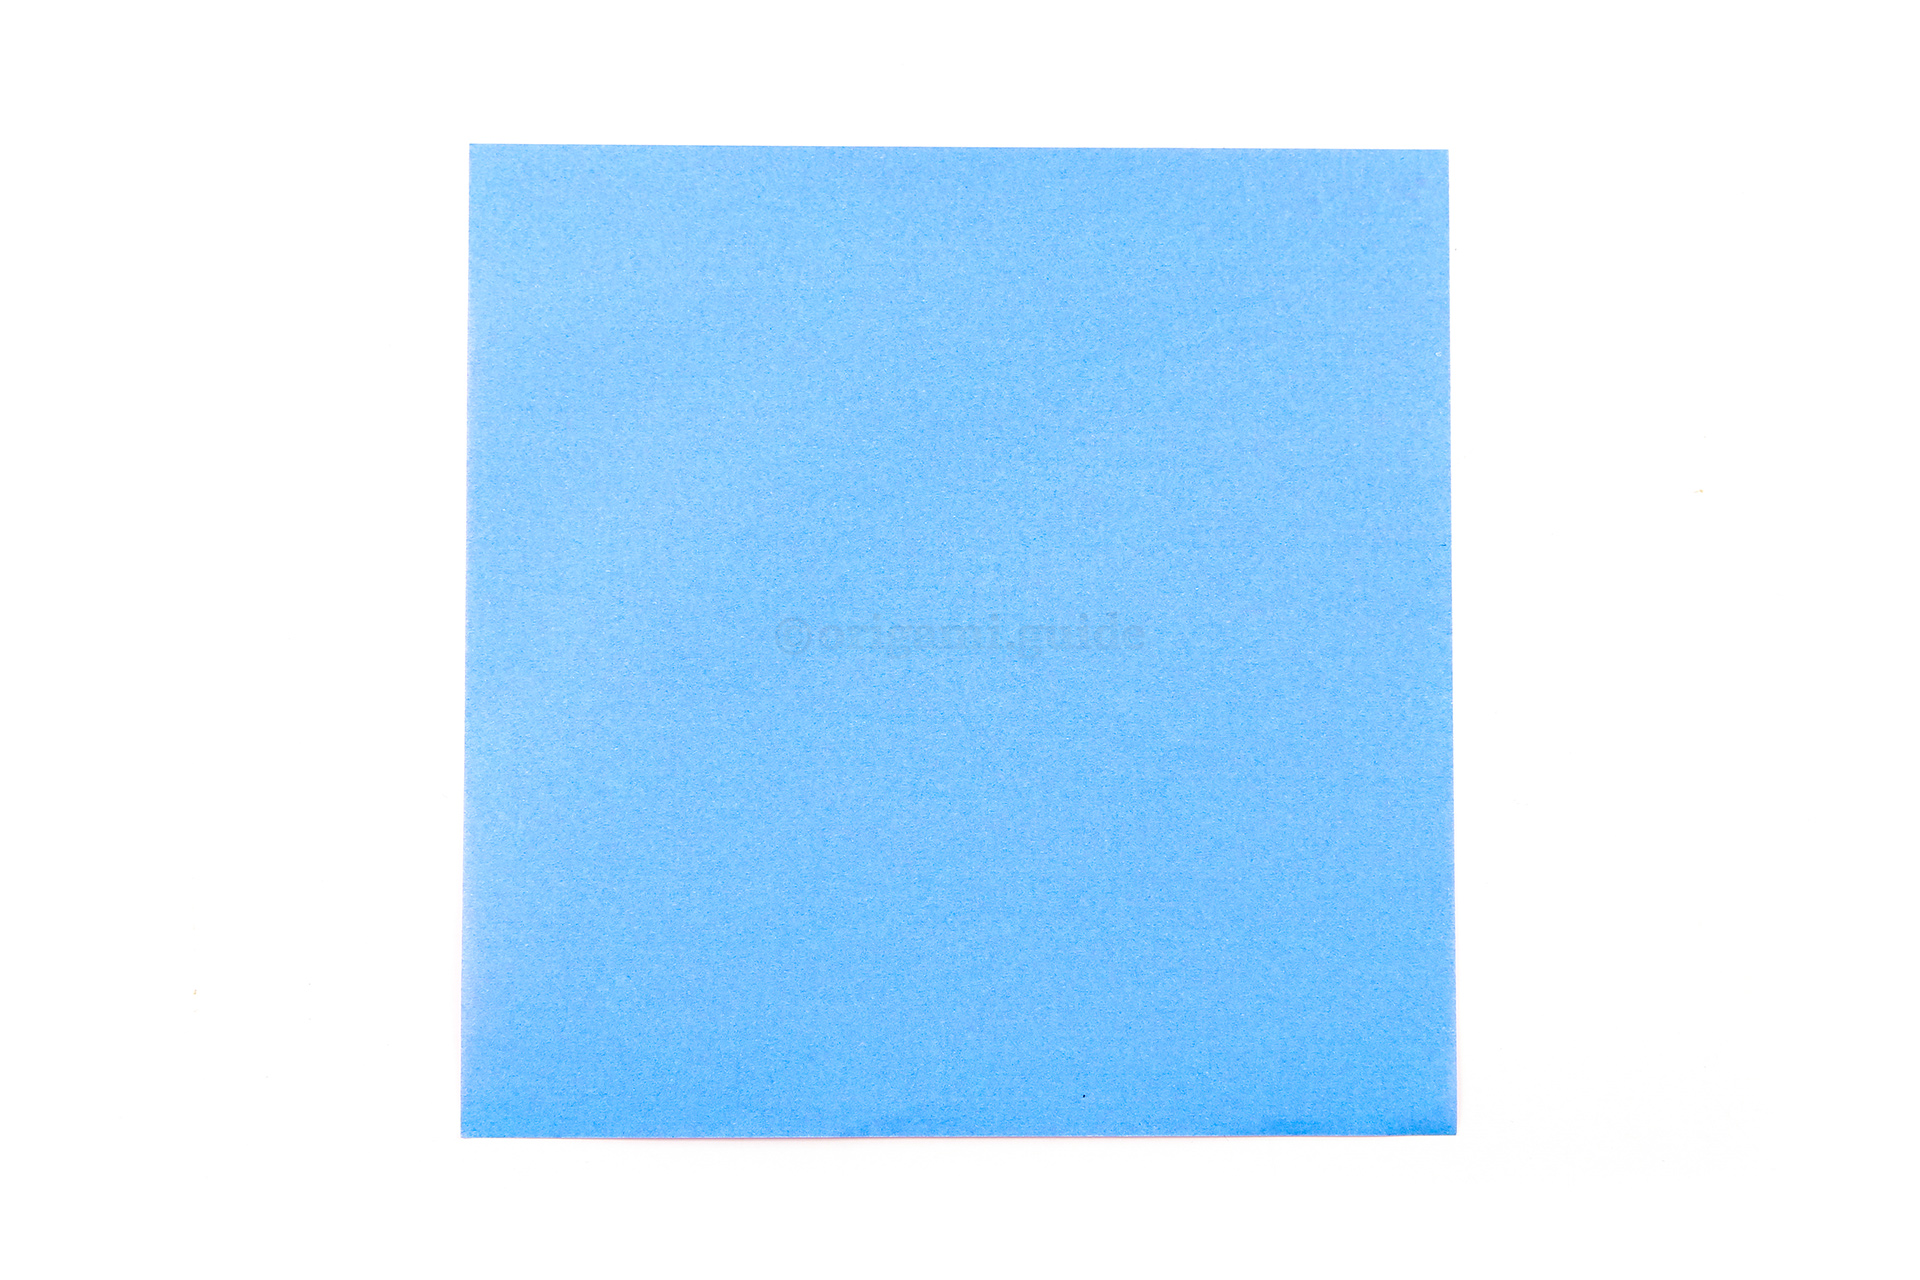 This is the back of our origami paper which is often white. You will not see this colour in the final model.